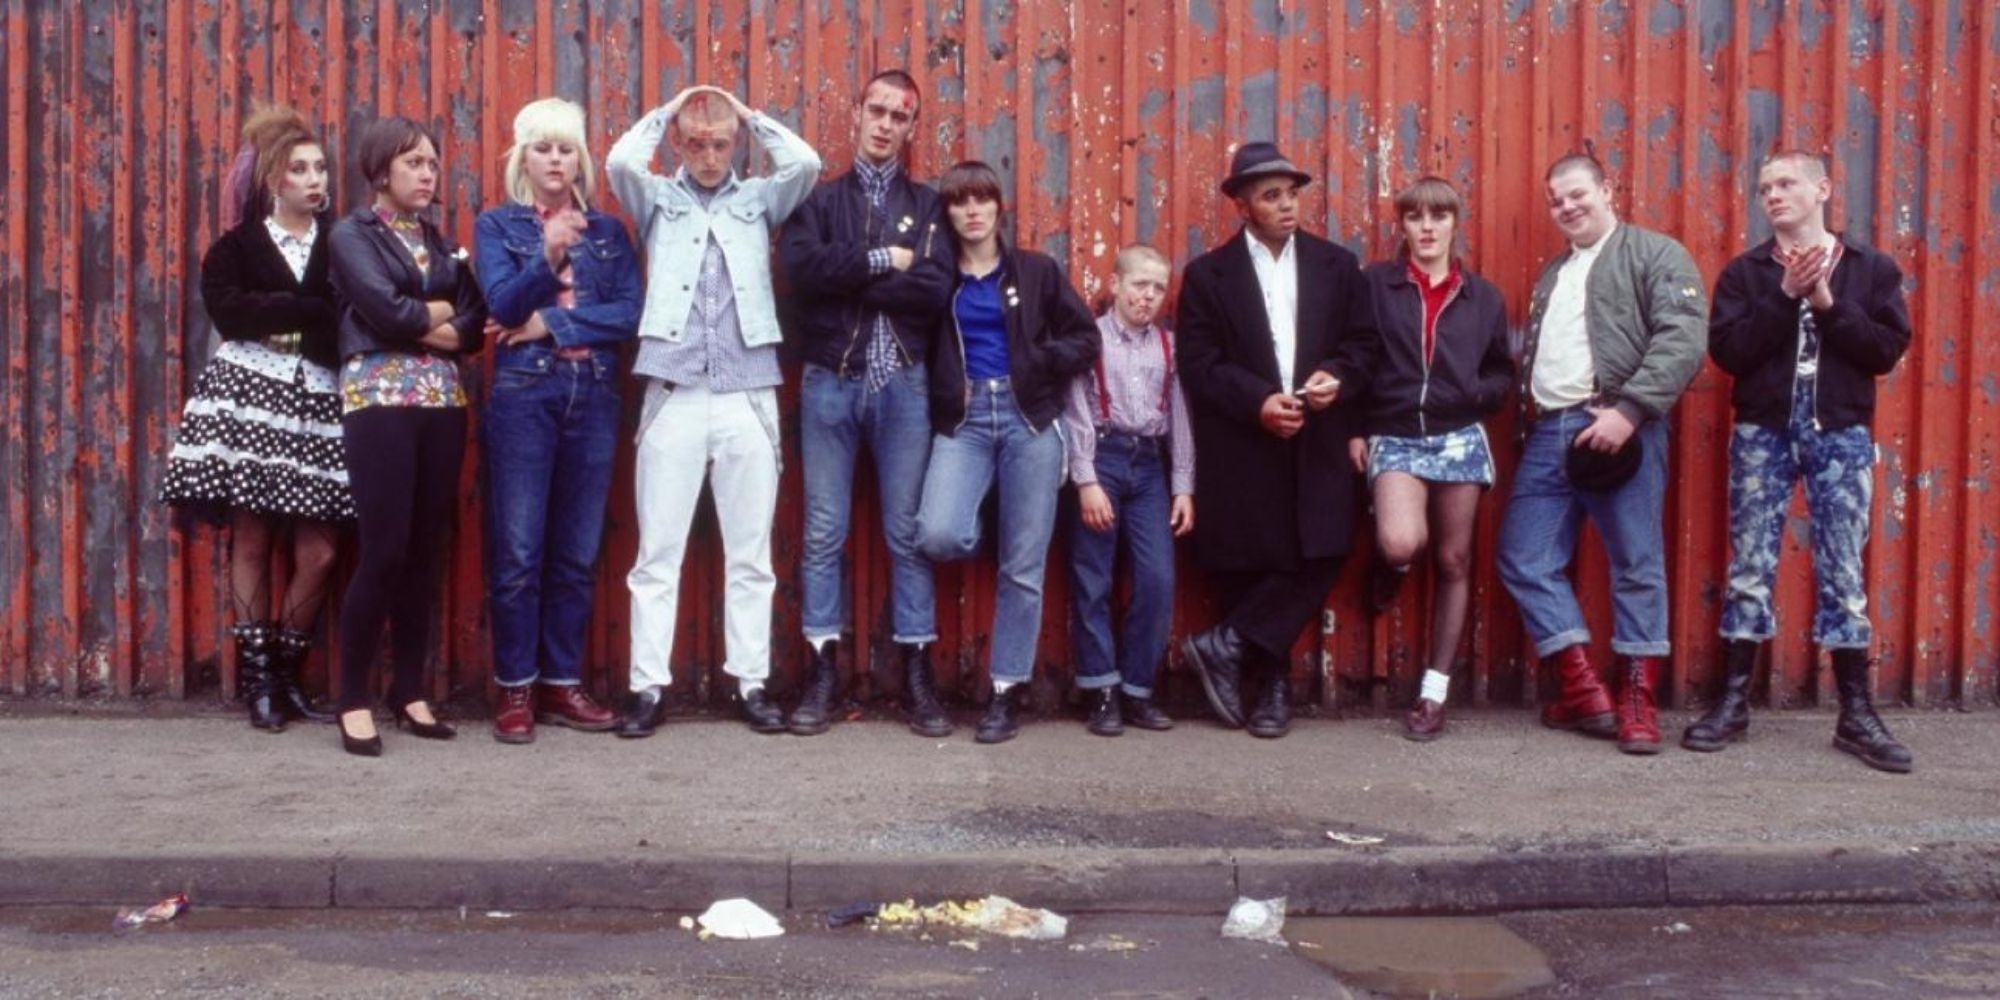 Group of punks and misfits leaning up against a corrugated red chipped wall in This is England.